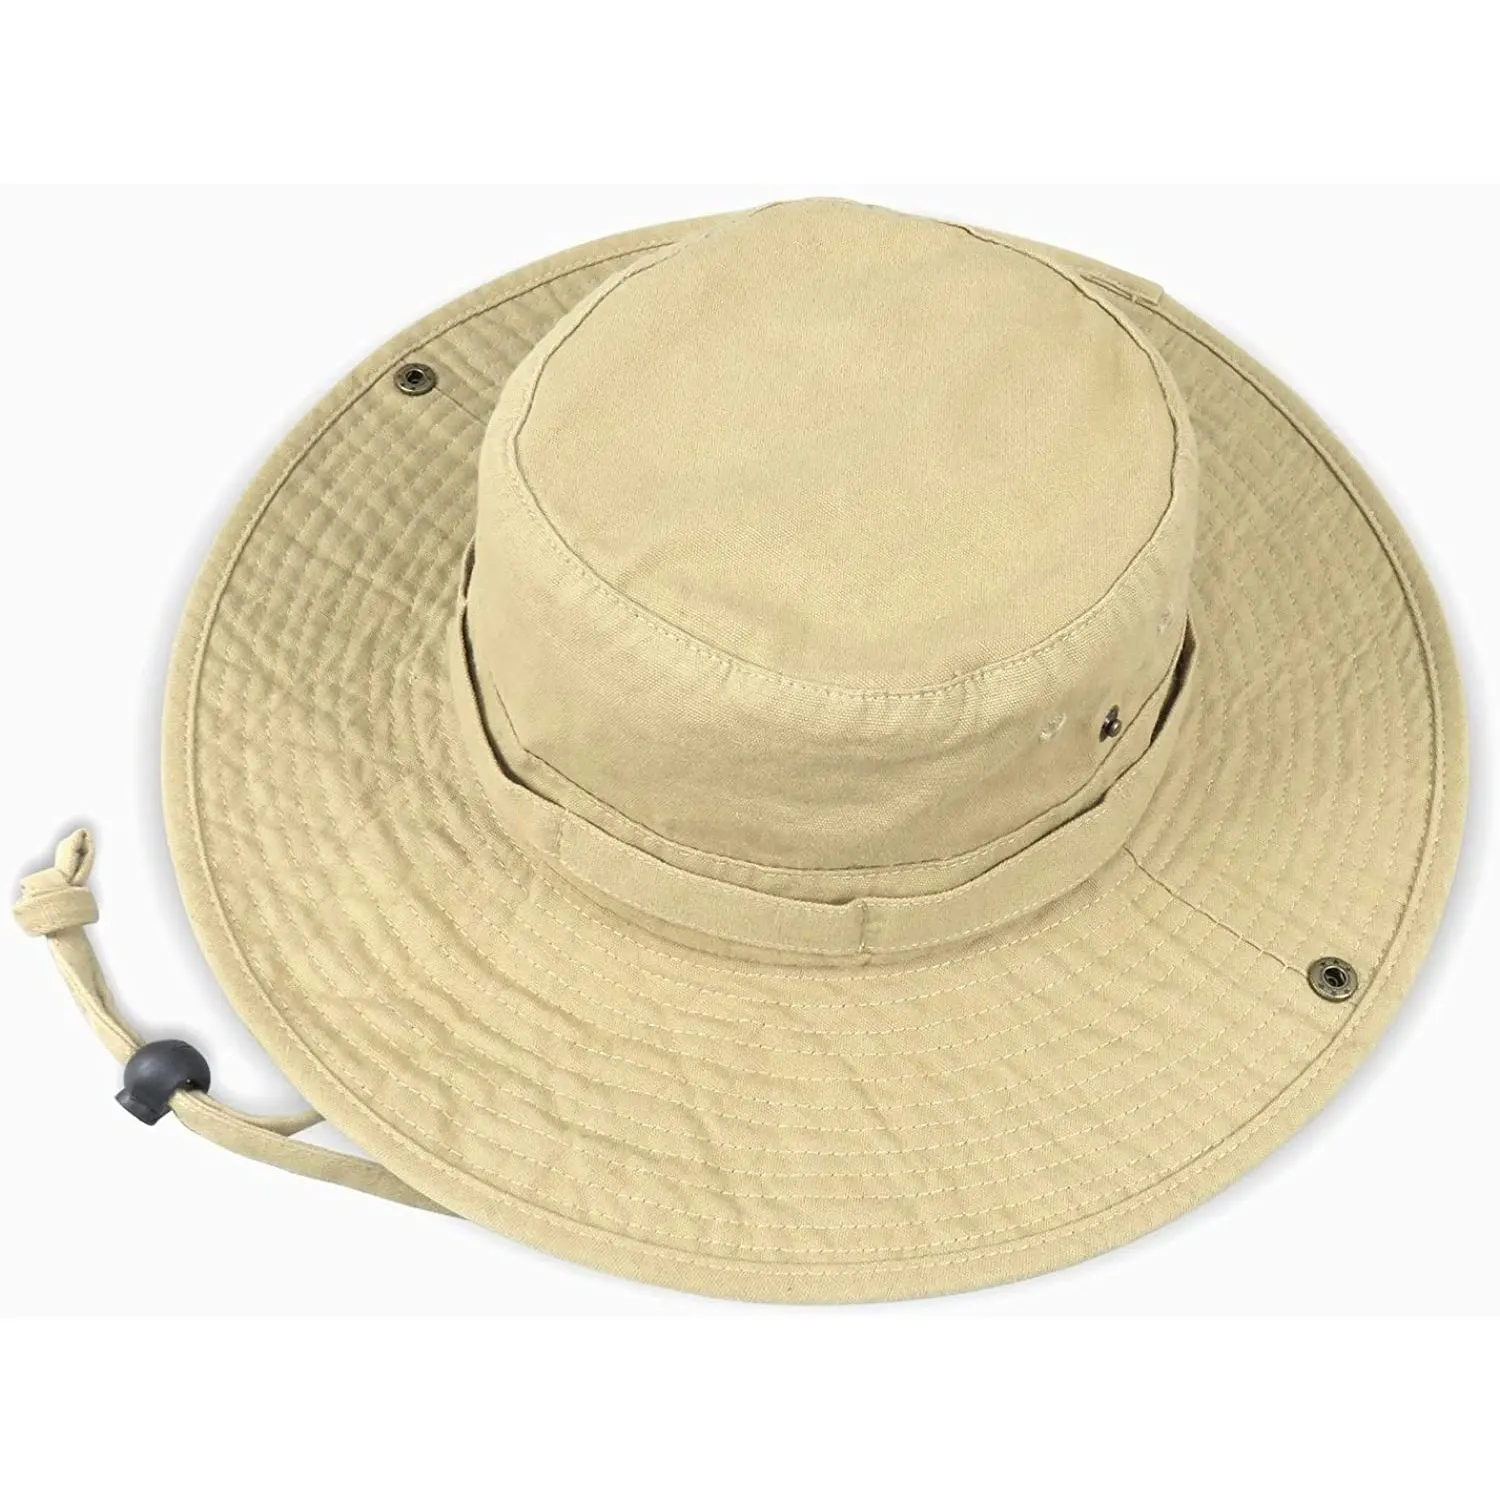 100% Cotton Man's and Woman's Bucket Hat UV Protection Hat Fishing Hiking Safari Outdoor